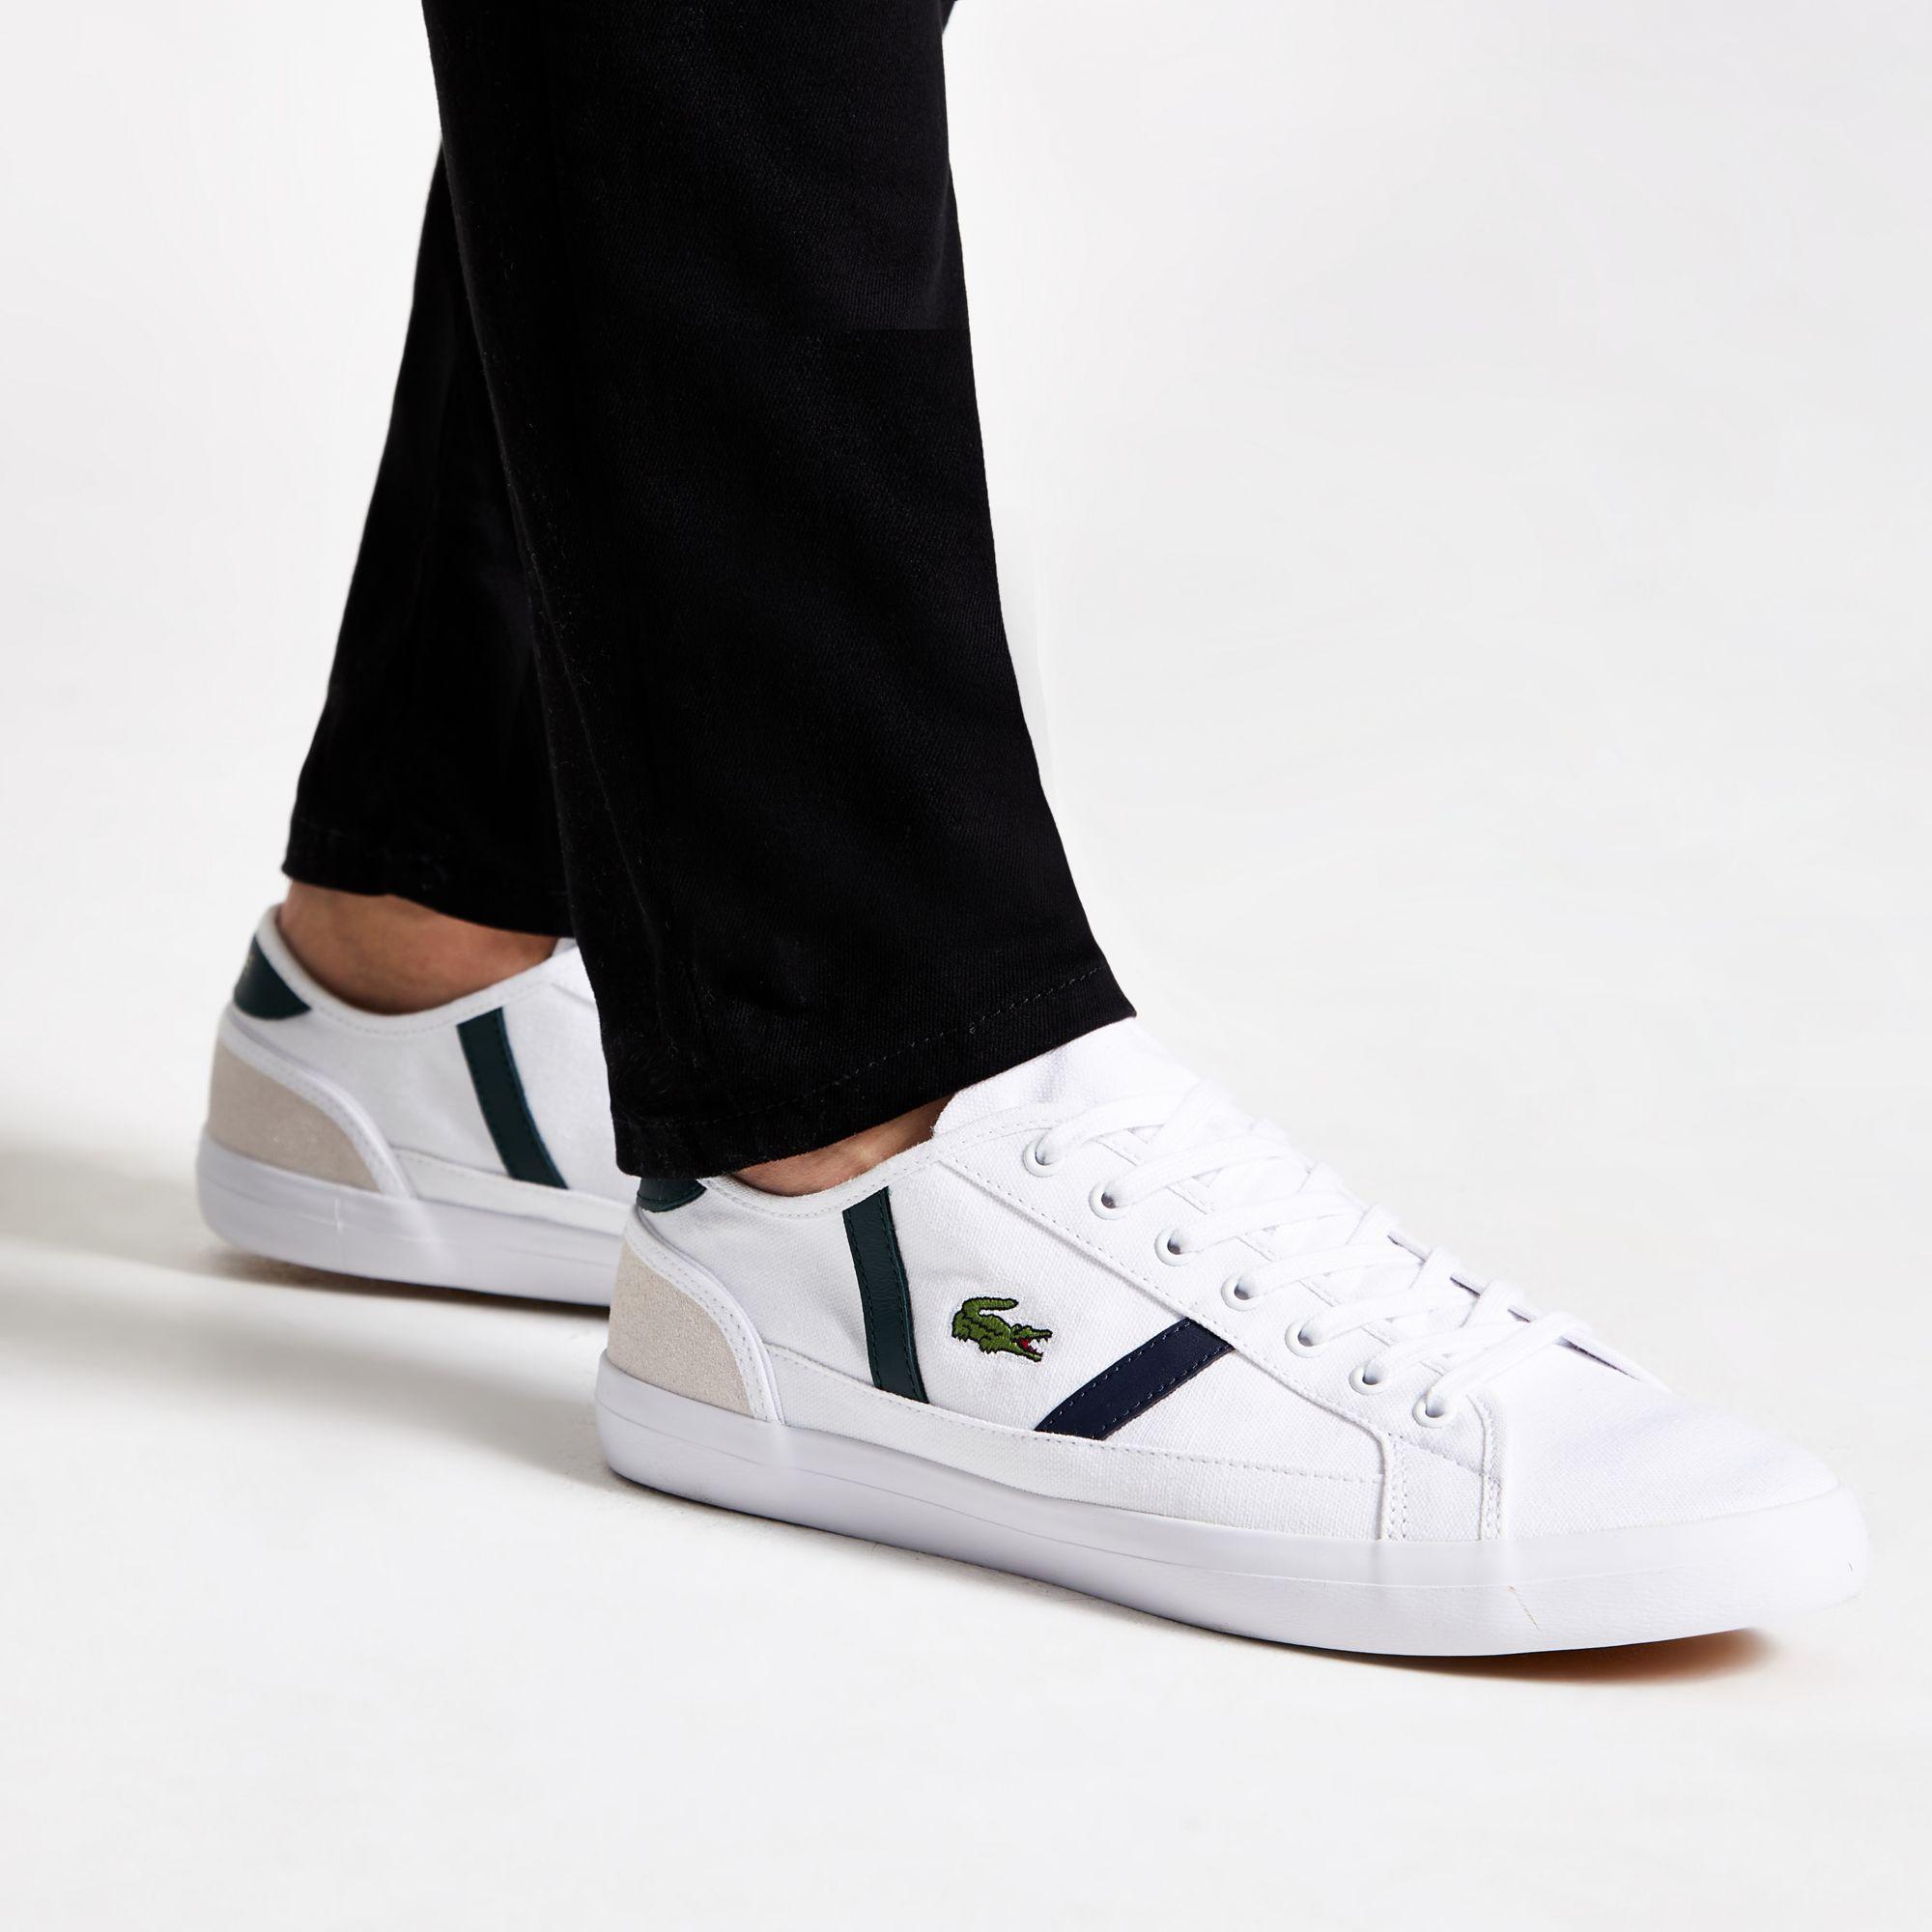 River Island River Island Sideline Canvas Trainers in White for Men - Lyst